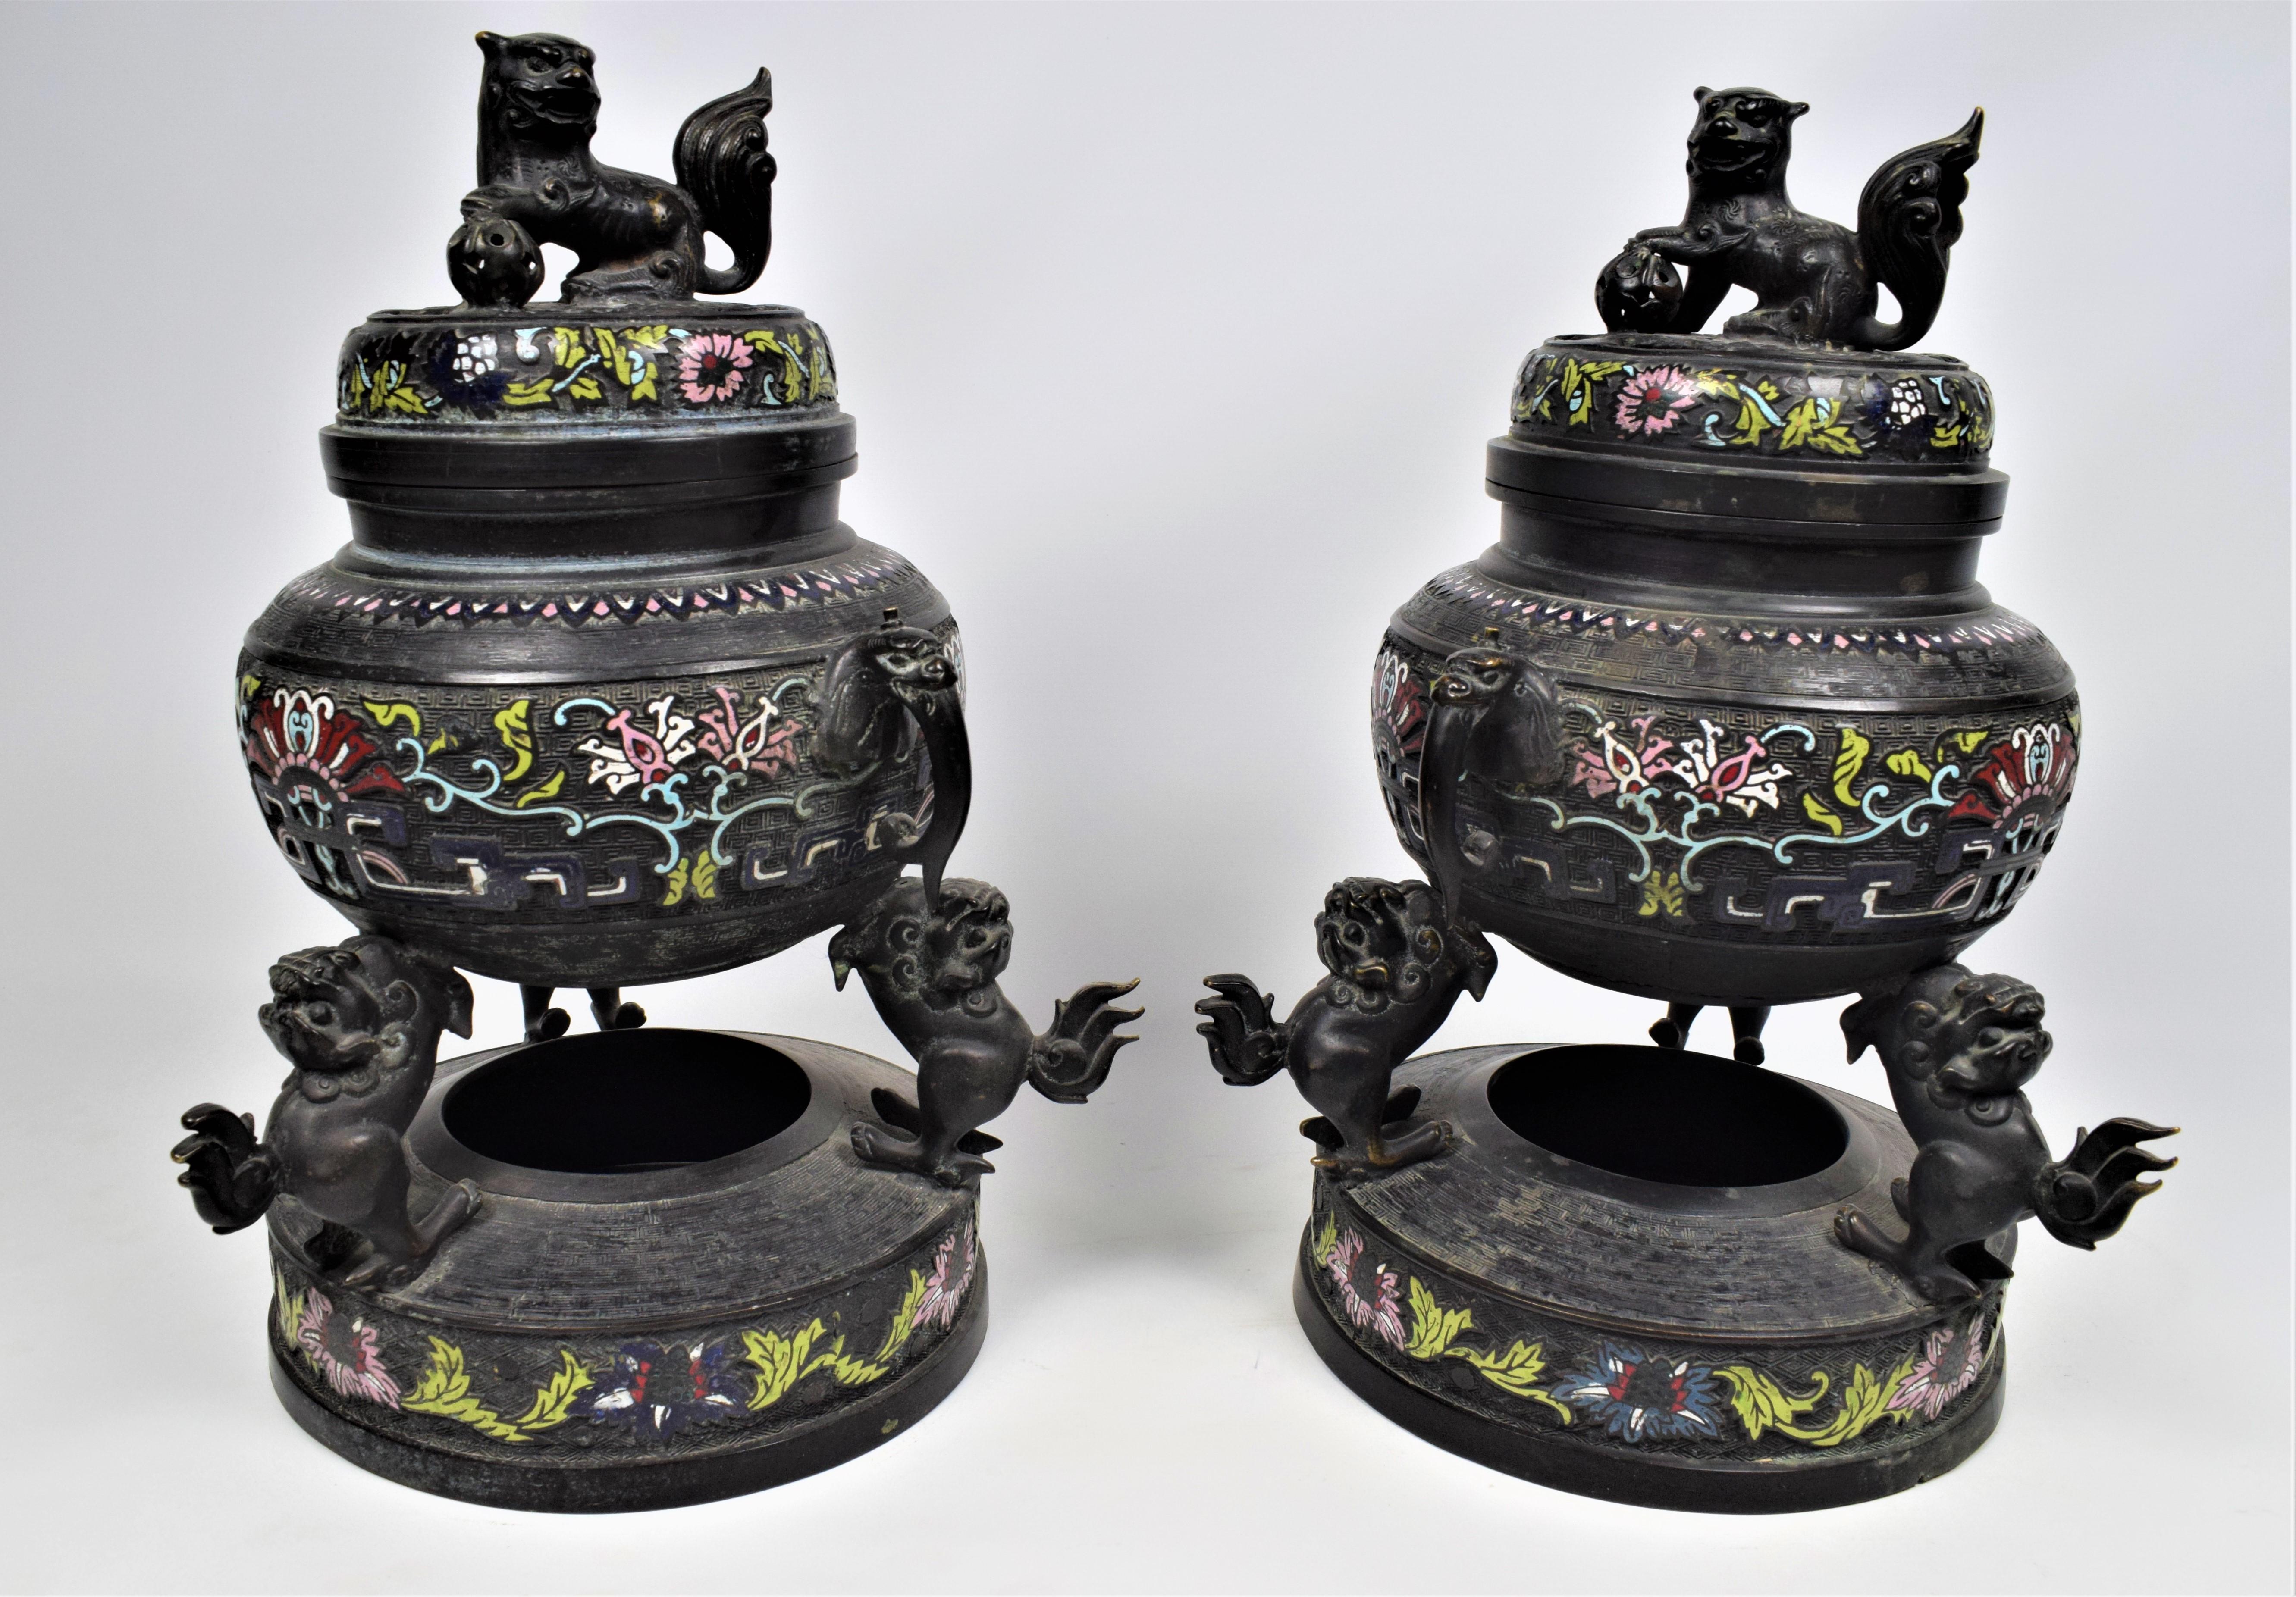 Pair Of Chinese Cloisonne Gilt Bronze Dragon Incense Burners, Late 19th Century In Good Condition For Sale In Islamabad, PK